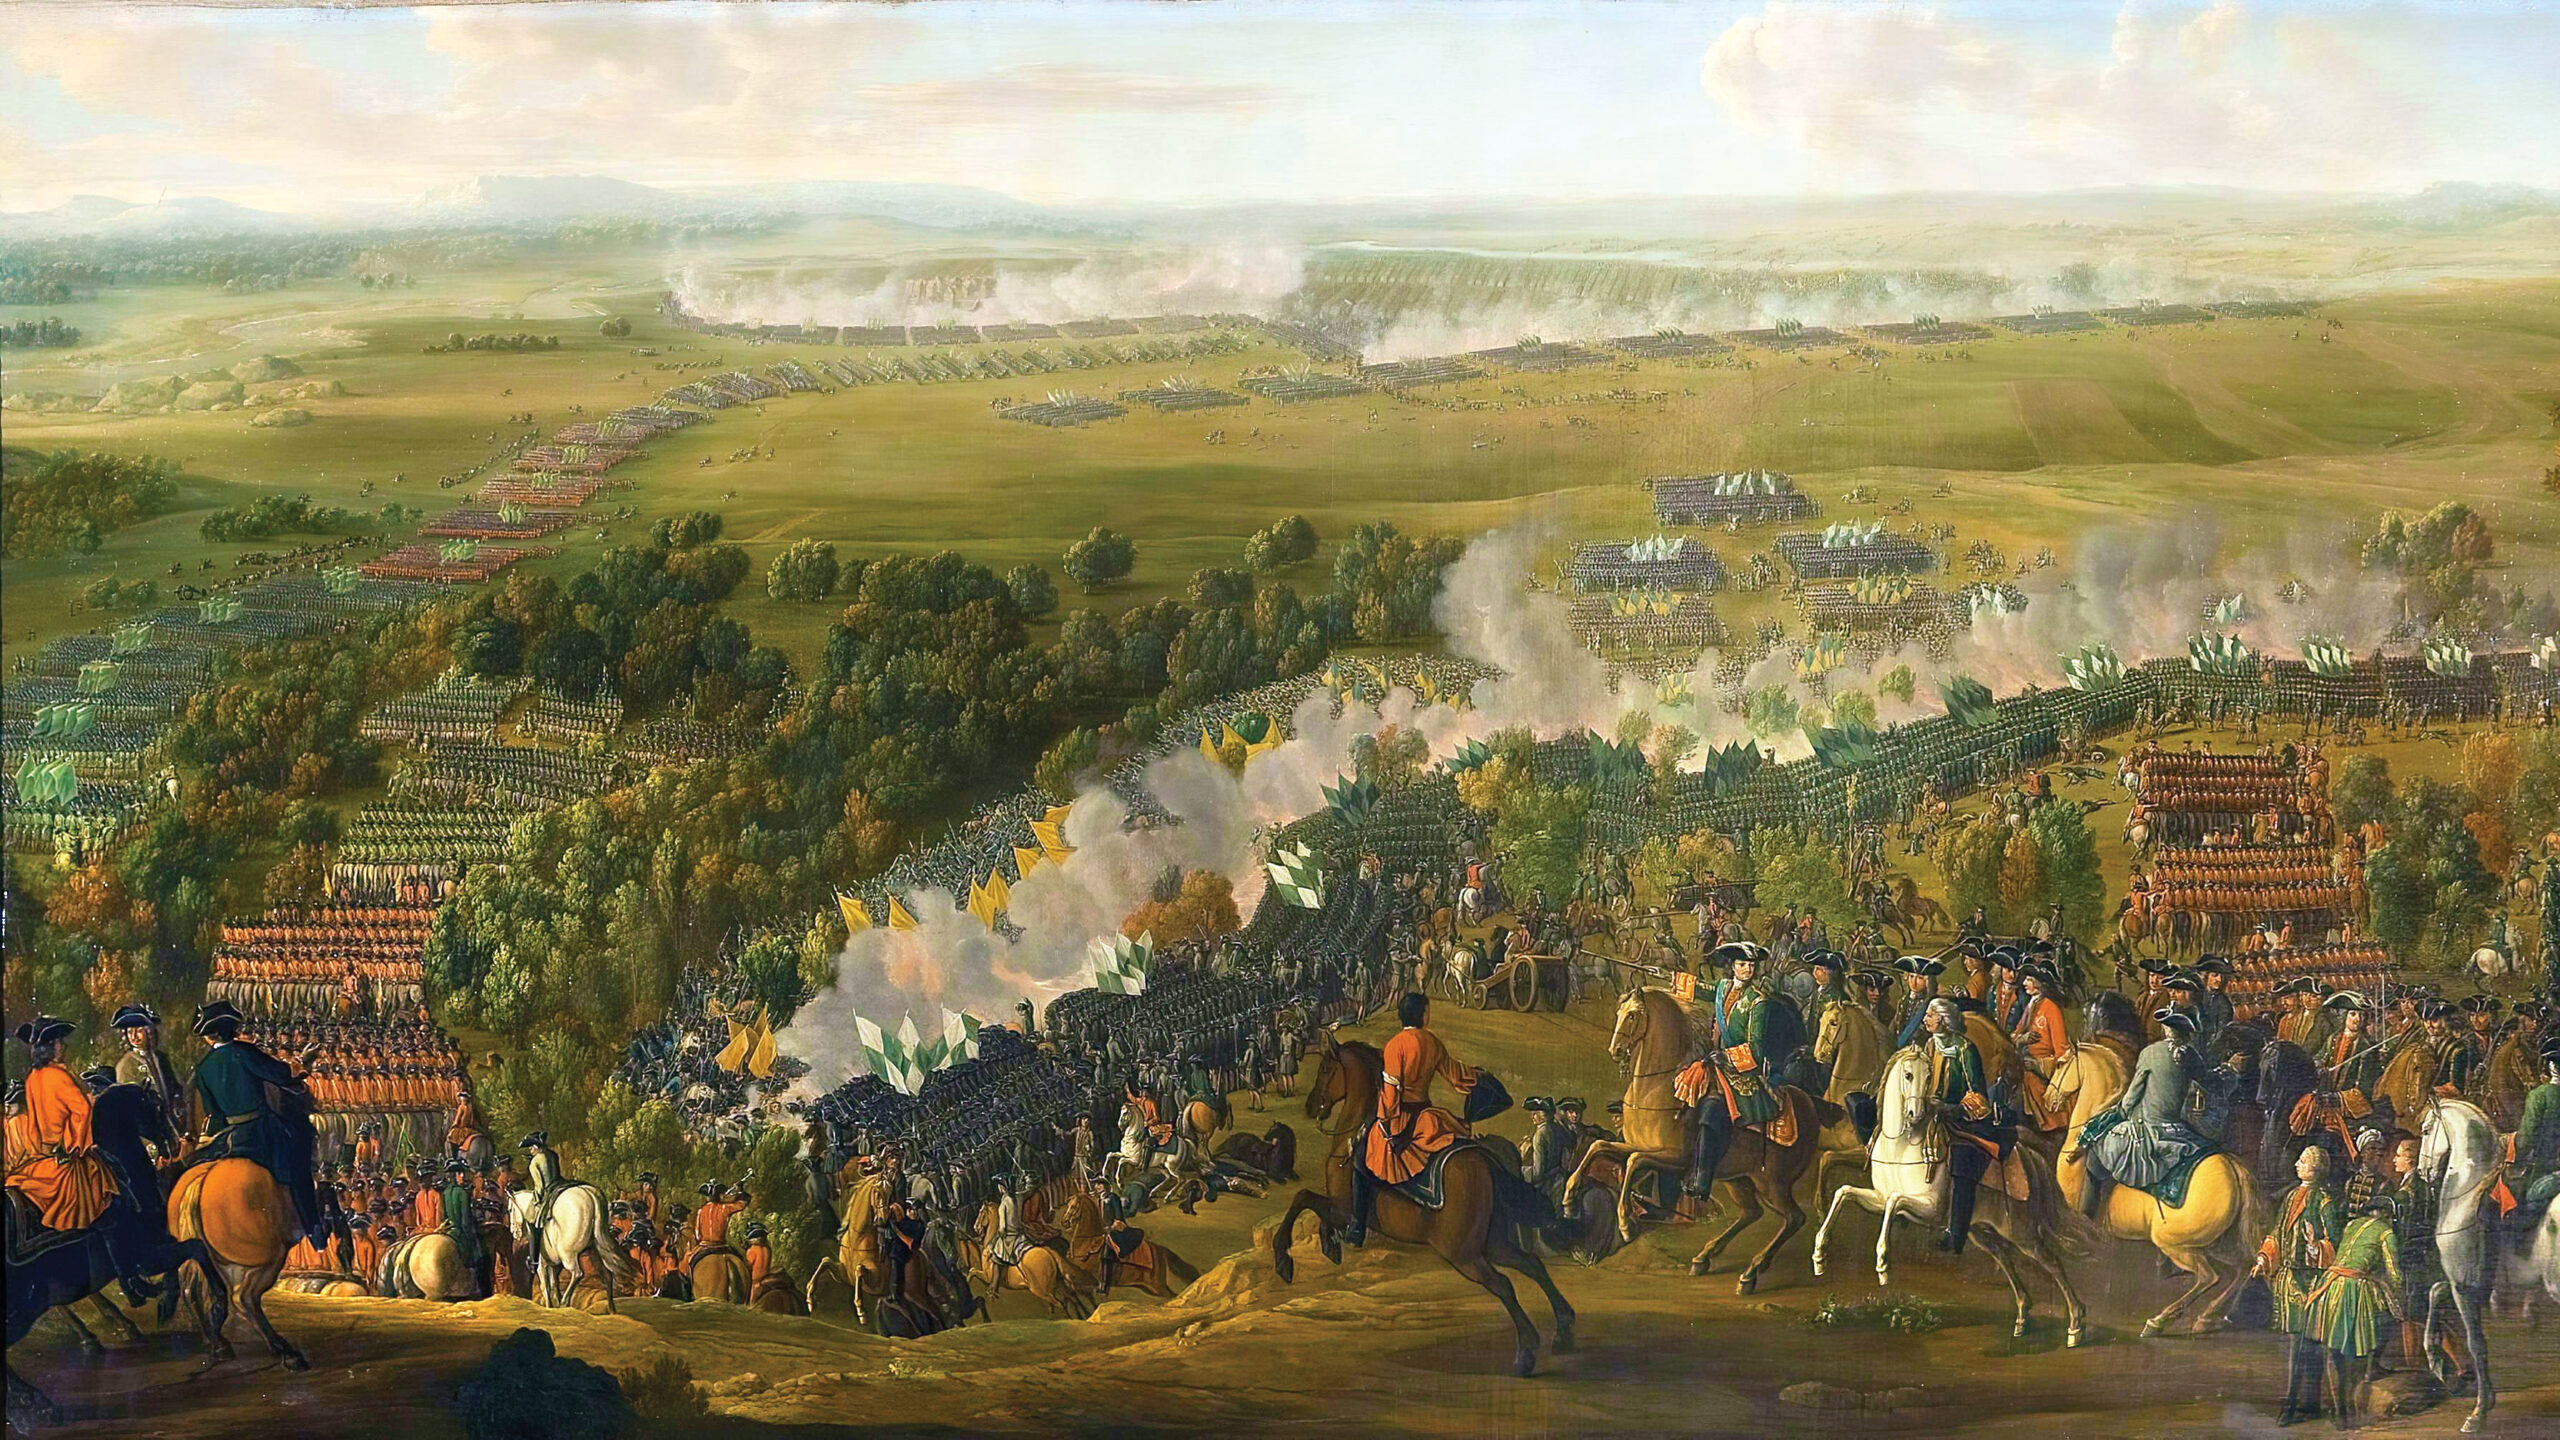 Always the optimist, Swedish King Charles XII did not blame Lewenhaupt for the catastrophe that occurred at Lesnaya. Rather than retreat to replenish his army, the Swedish king attacked at Poltava with disastrous results.